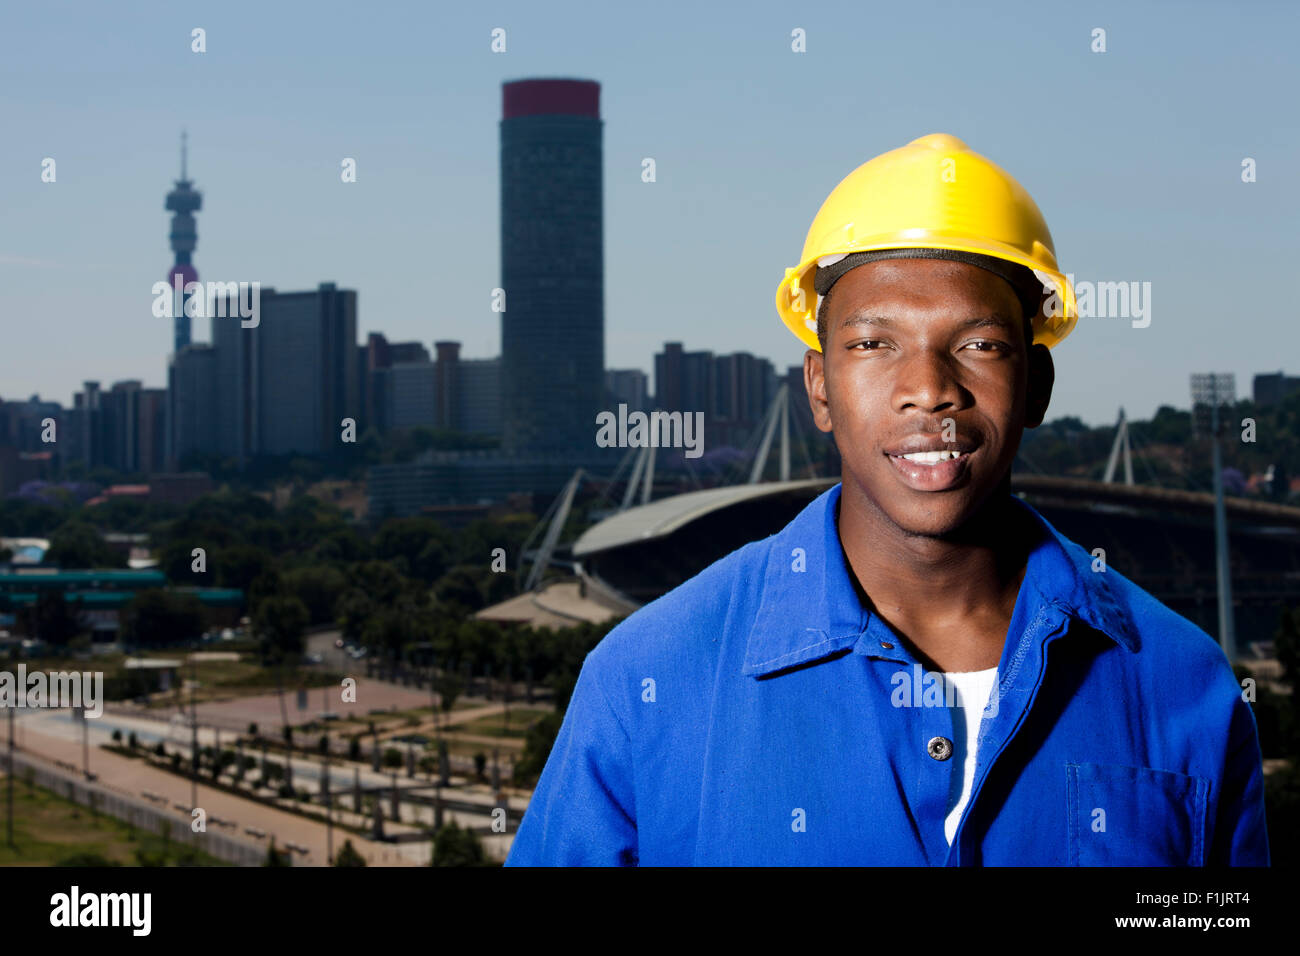 Man with hardhat stands with cityscape in background Stock Photo